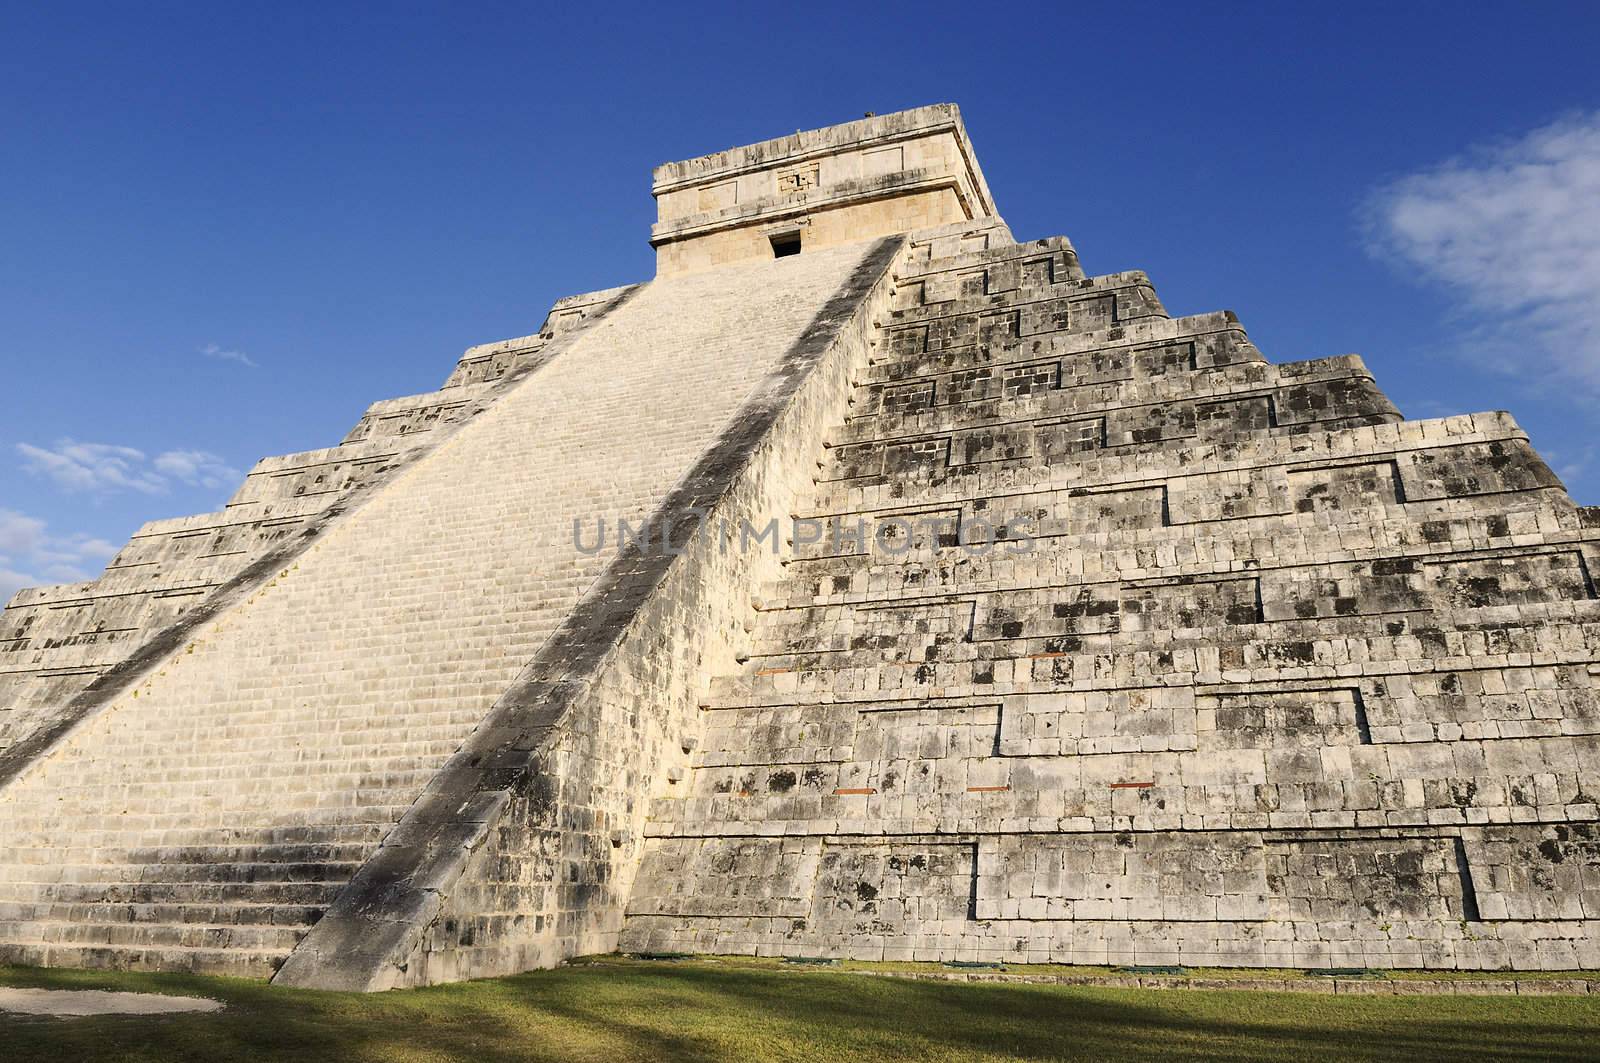 Chichen Itza feathered serpent pyramid, Mexico 